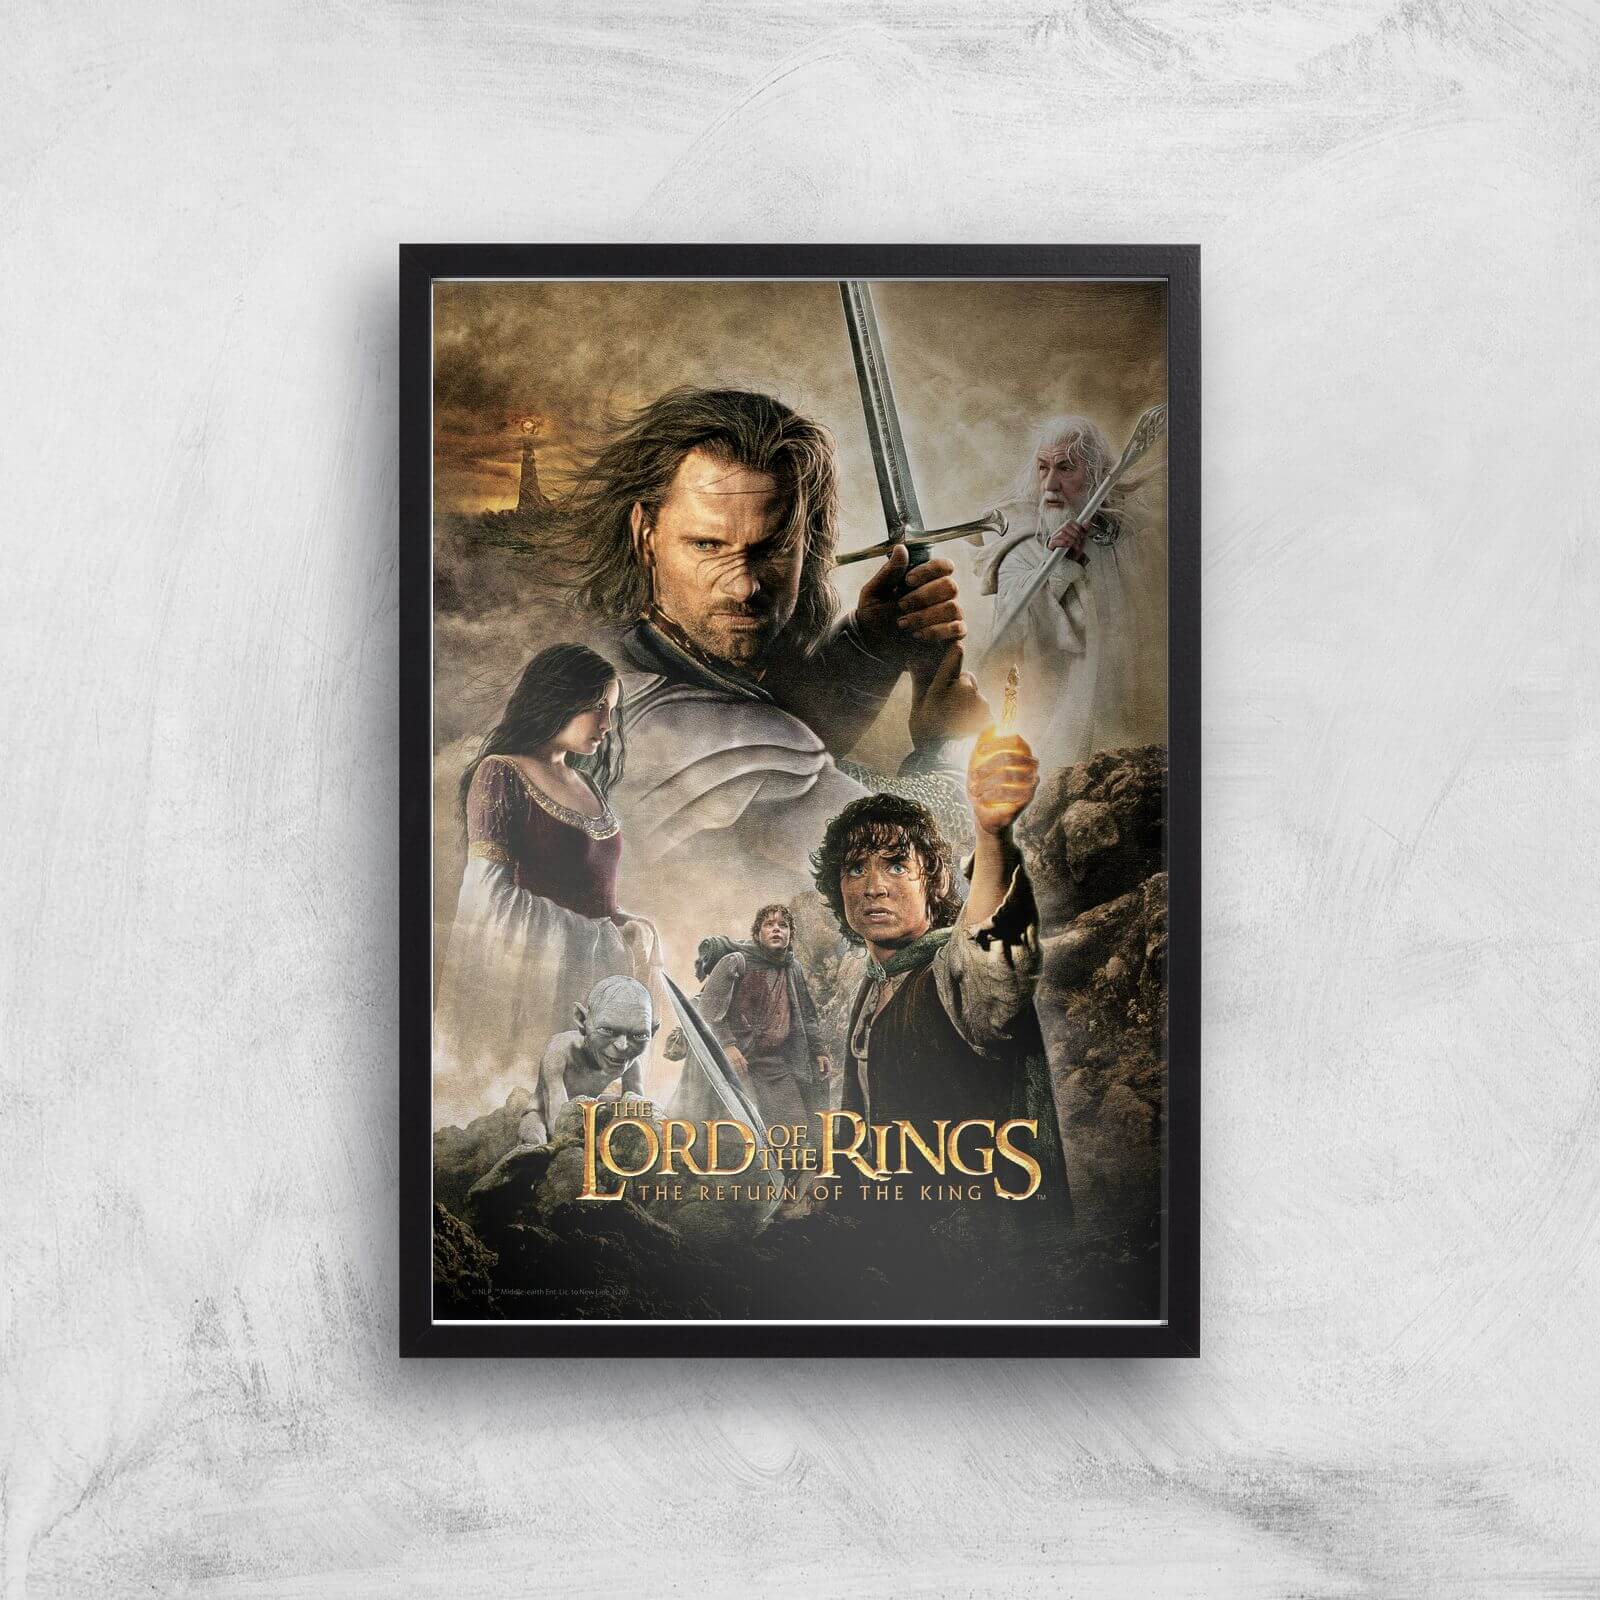 Lord Of The Rings: The Return Of The King Giclee Art Print - A3 - Black Frame